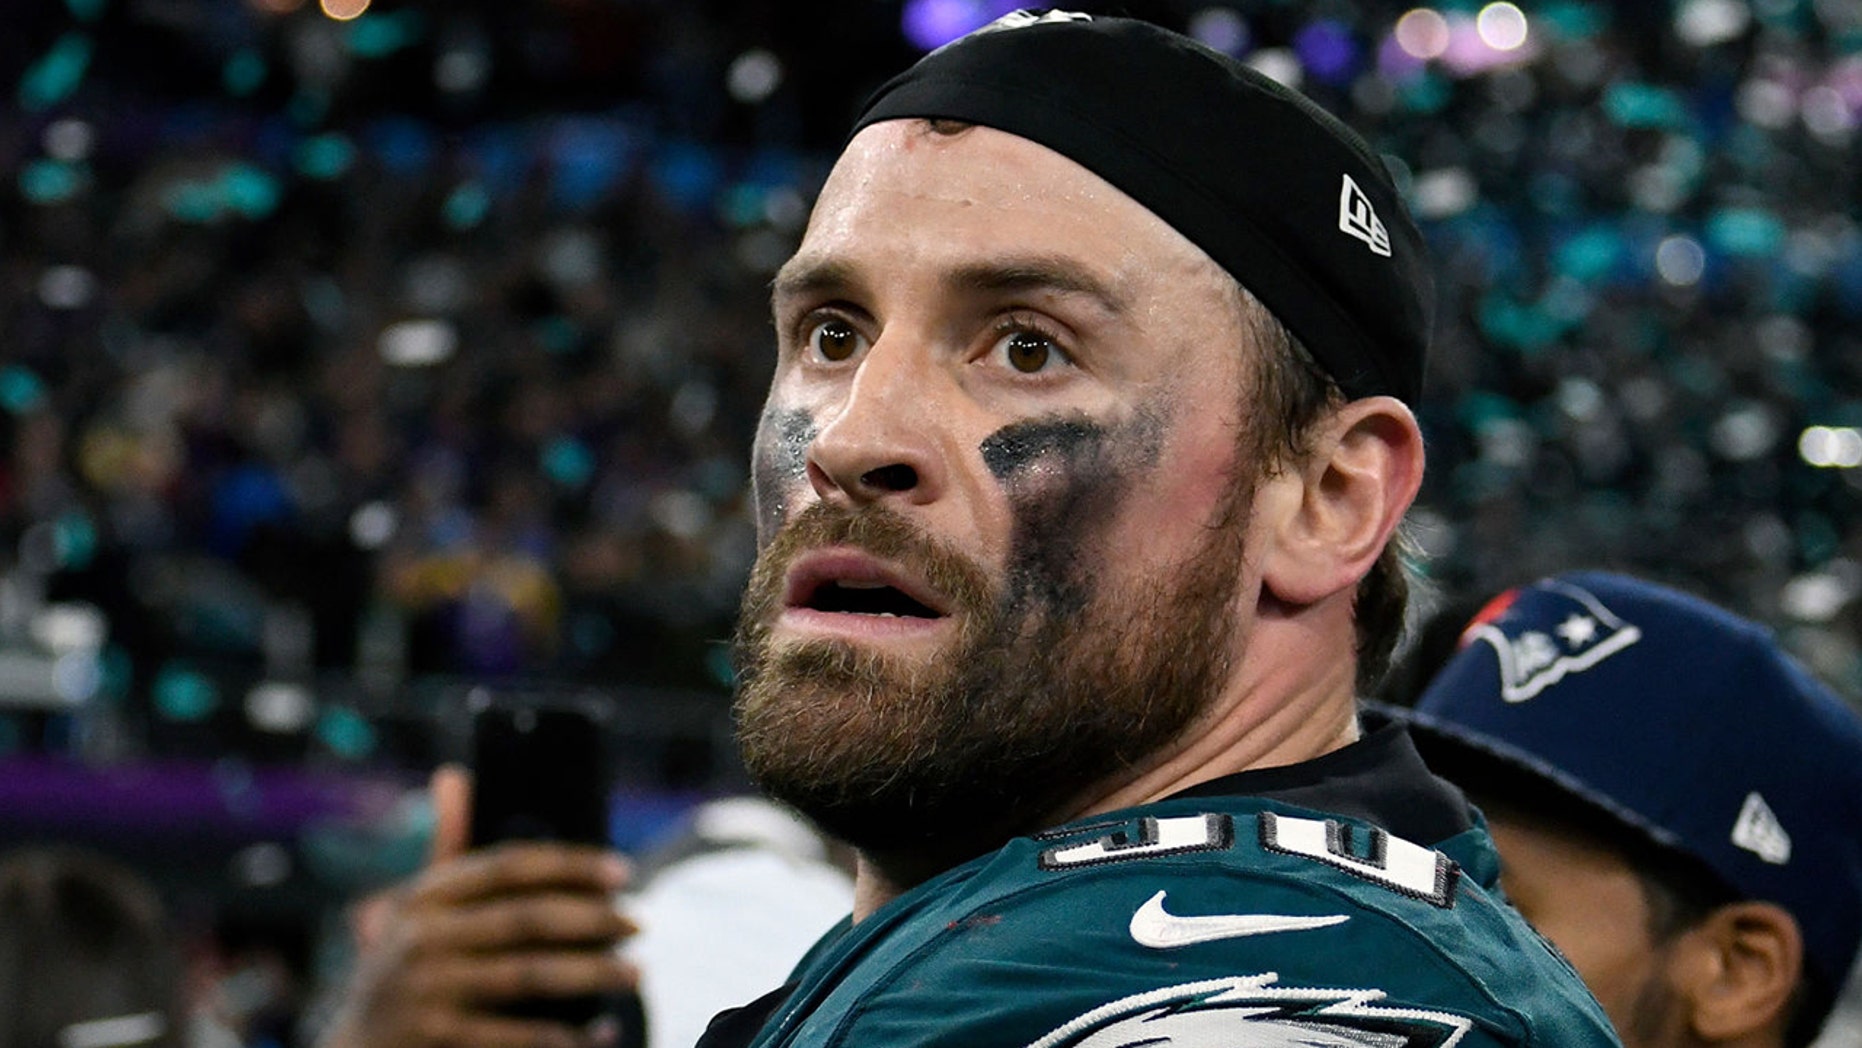 Chris Long, who recently announced his retirement from football, ended an 11-year career in the NFL, including two Super Bowl titles and Walter Payton's Man of the Year award. (Getty Images) 